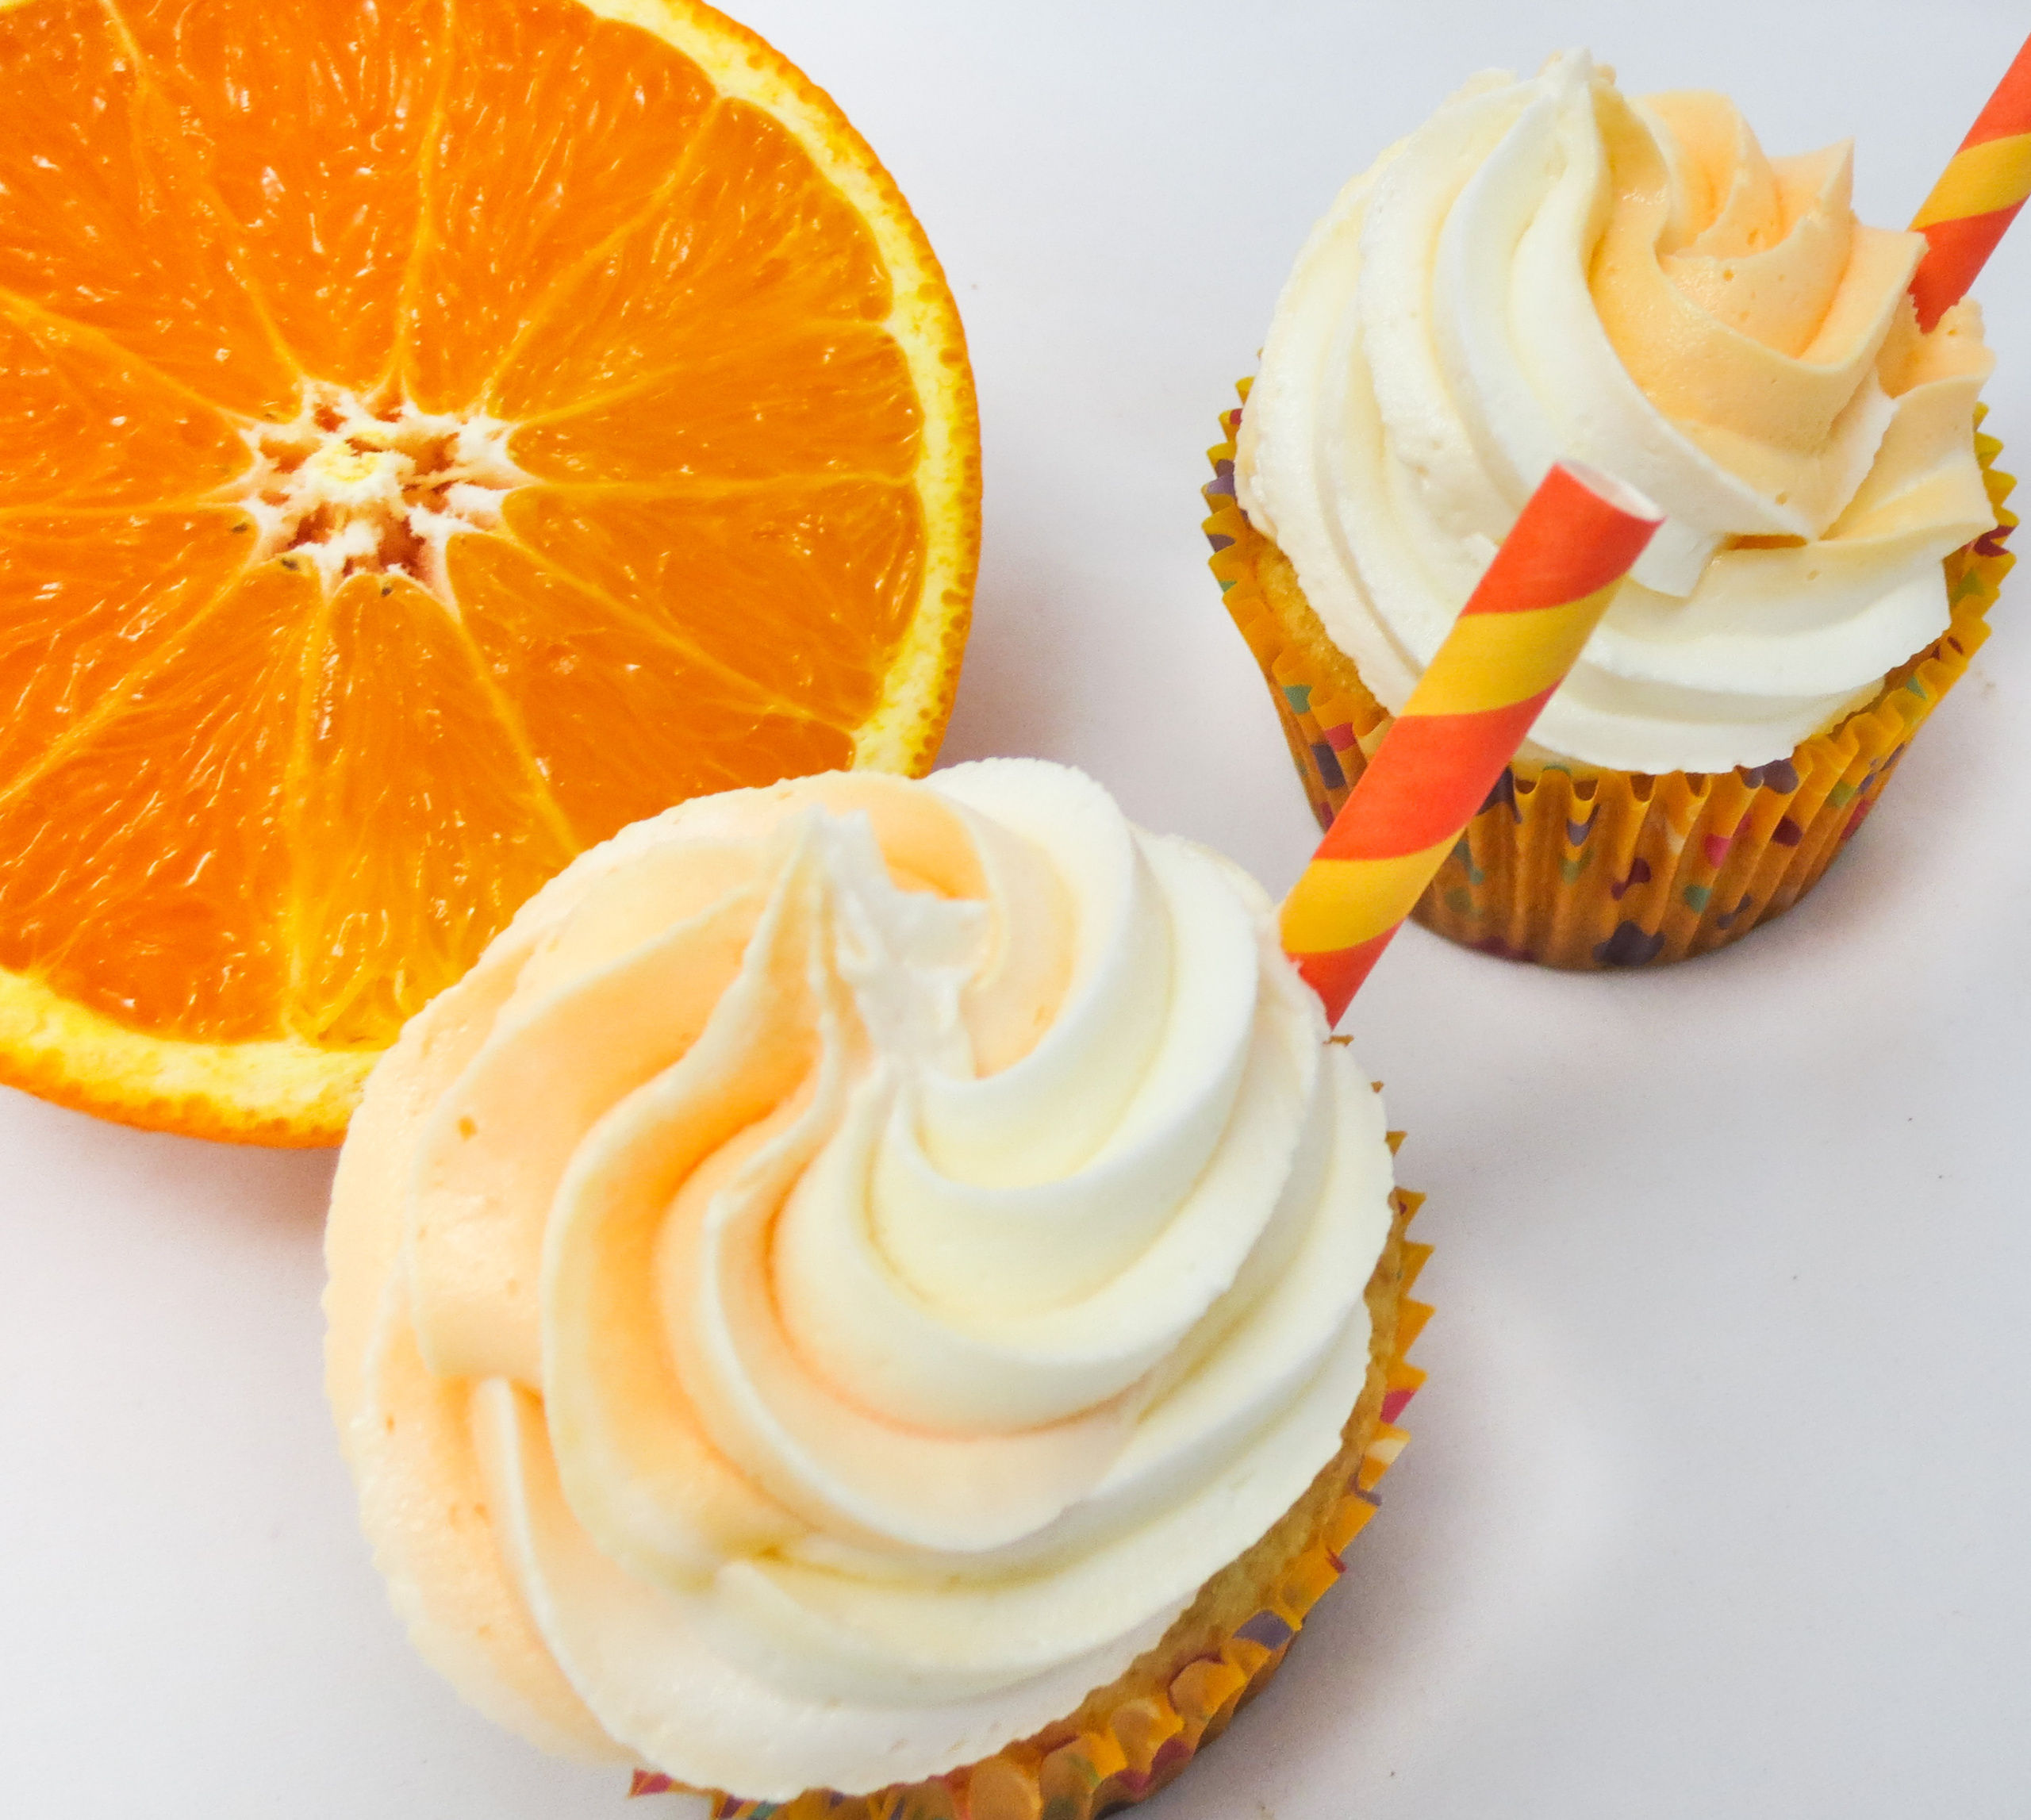 Orange Dreamsicle Cupcakes are moist, delicious orange cupcakes topped with a dreamy vanilla buttercream frosting. Reminiscent of a childhood favor ice cream treat, these cupcakes are sure to be a hit with young and old alike! Recipe shared with permission granted by Jenn McKinlay, author of BUTTERCREAM BUMP OFF.